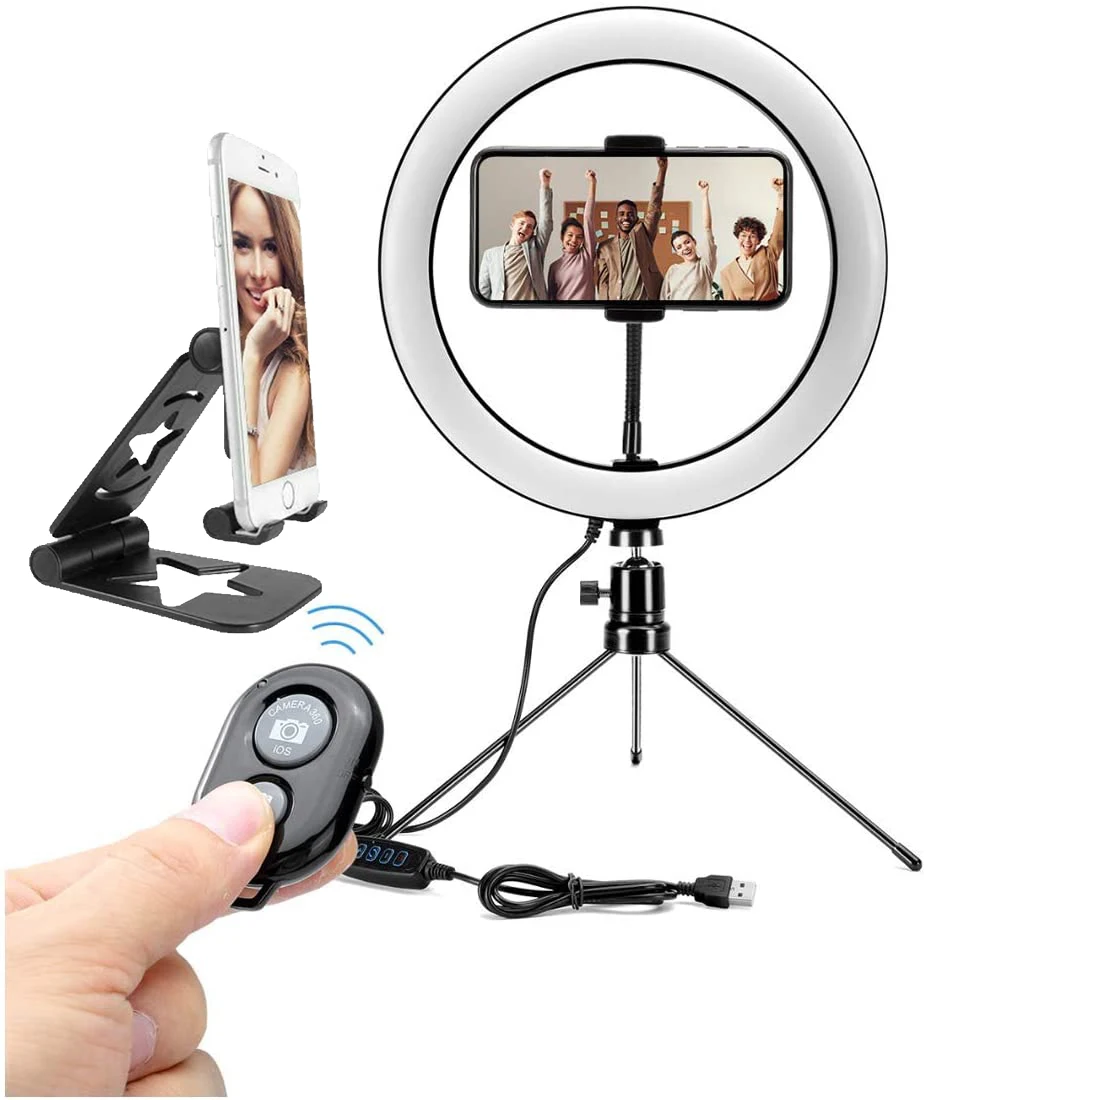 

LED 10" Photography Fill Ringlight Selfie Circle Light Dimmable Ring Lamp Tripod Stand Phone Holder Makeup Live YouTube